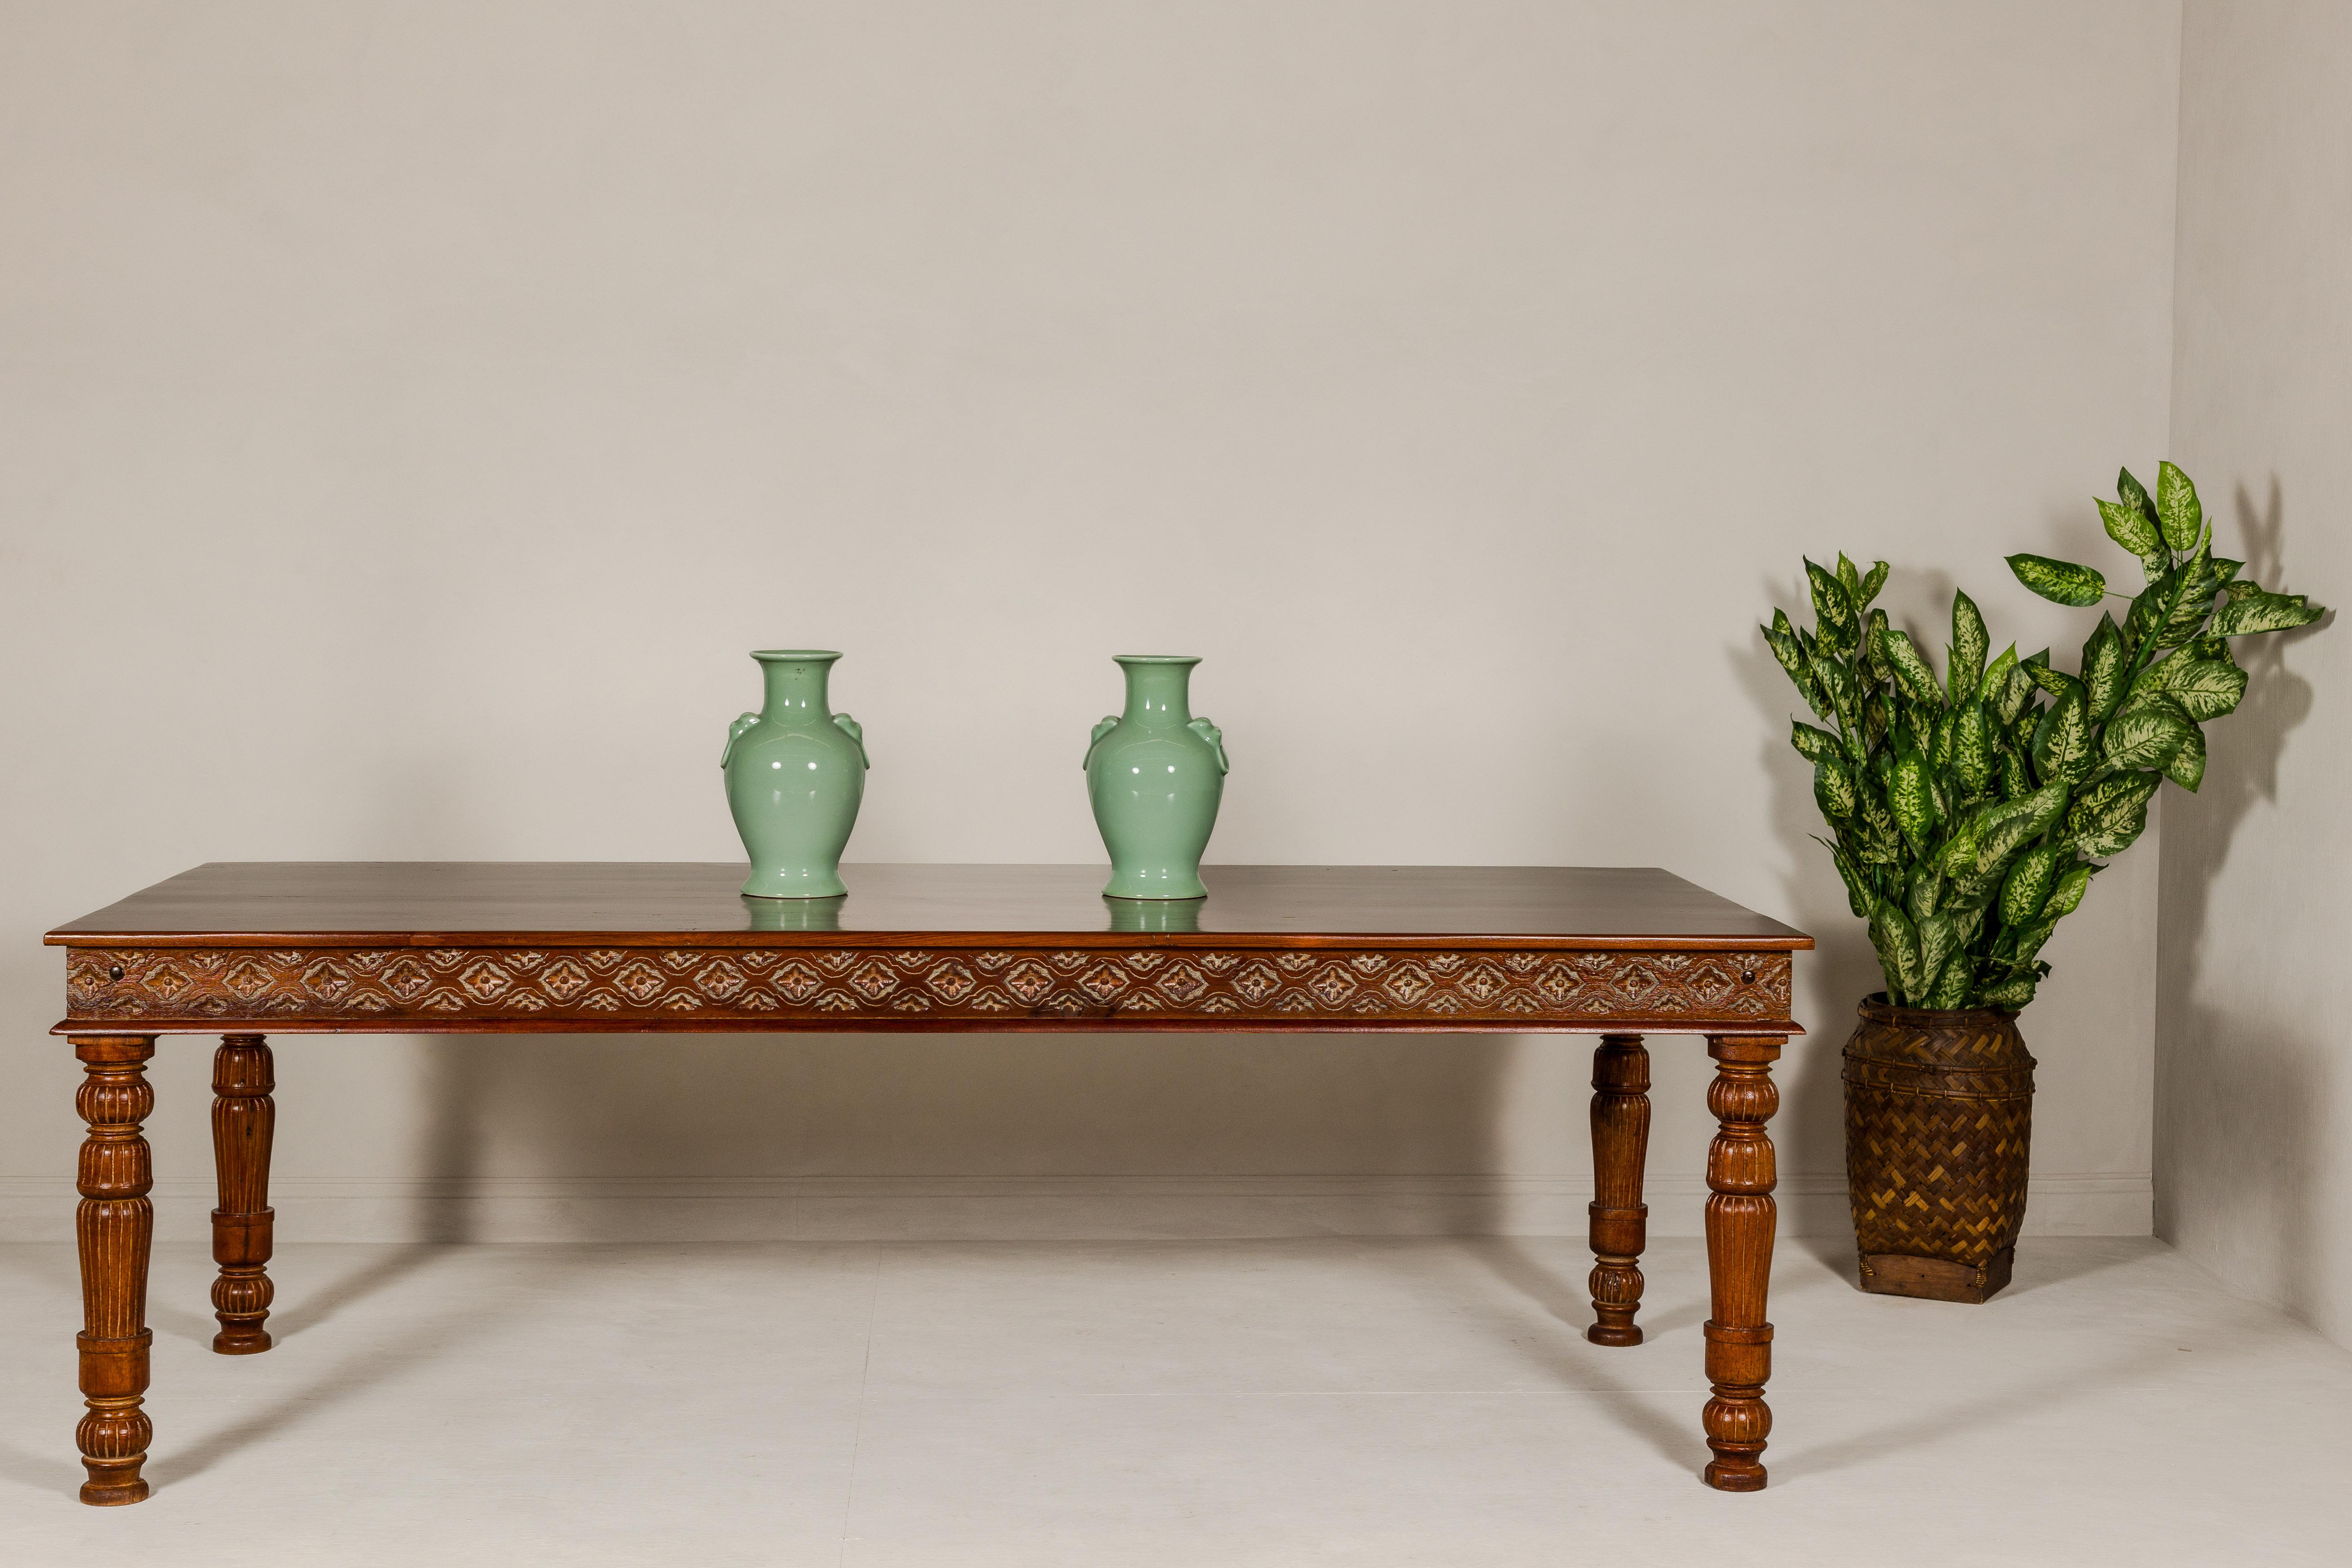 A large vintage dining table with carved apron showcasing floral motifs standing out on more unvarnished accents. This large vintage dining table, professionally refinished to accentuate its unique features, is a striking blend of craftsmanship and